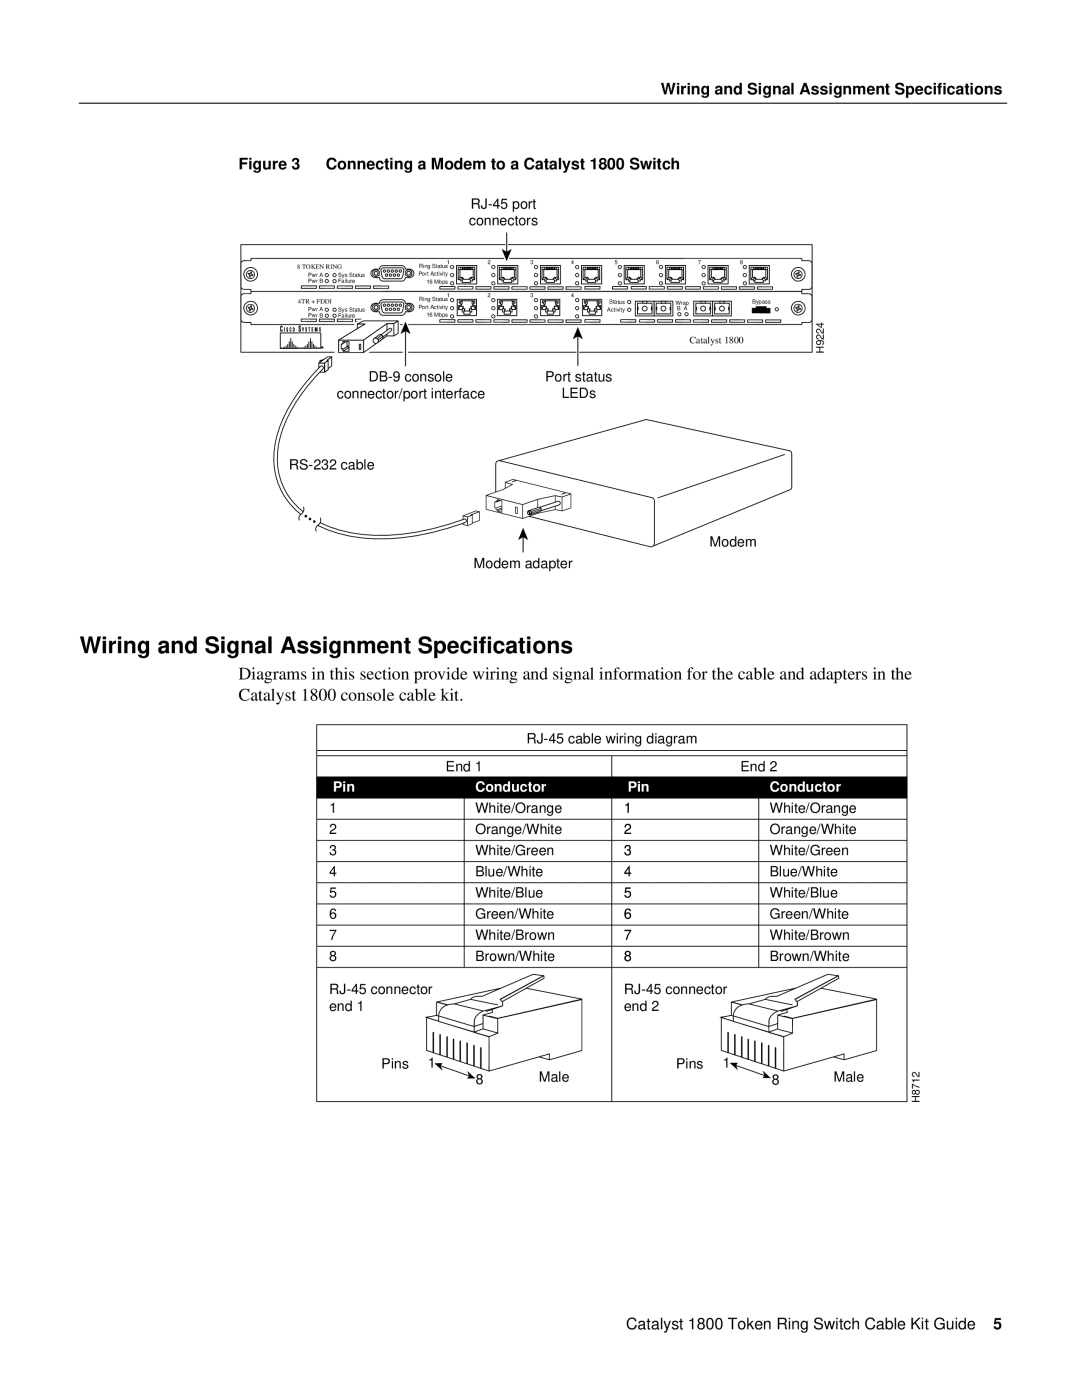 Cisco Systems EIA/TIA-232 manual Wiring and Signal Assignment Speciﬁcations, Wiring and Signal Assignment Specifications 